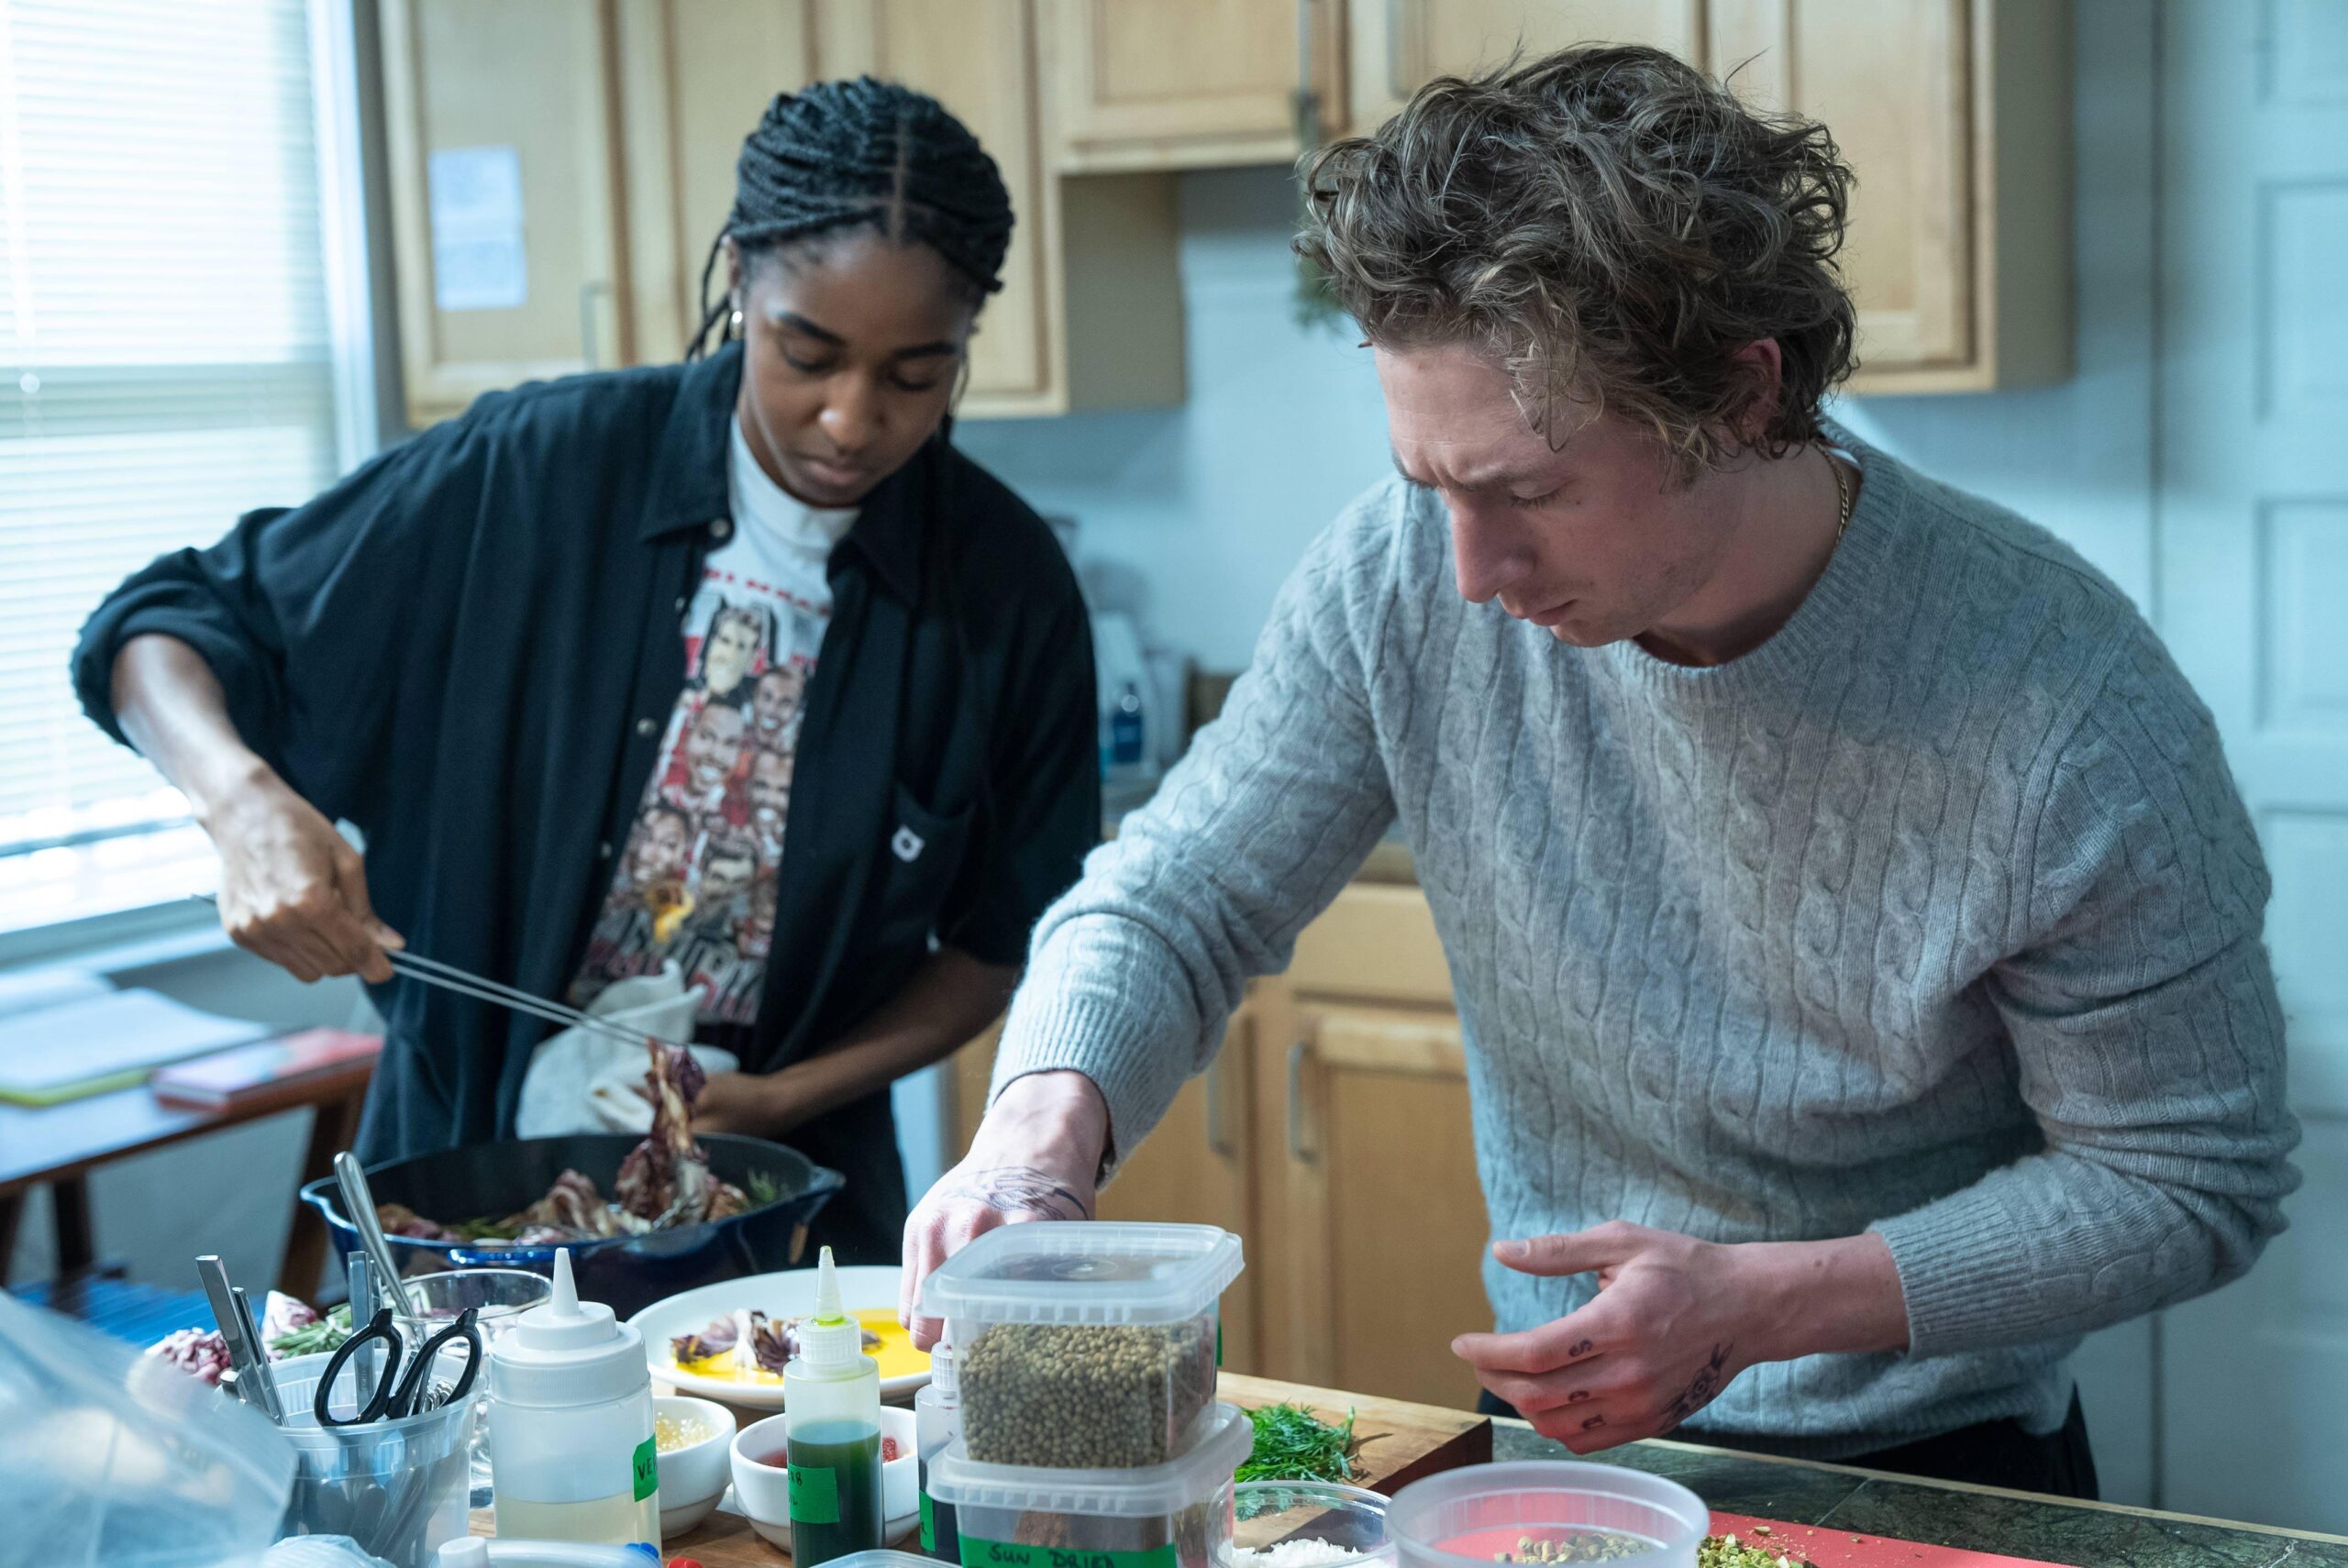 Carmy (Jeremy Allen White) and Sydney (Ayo Edebiri) cooking